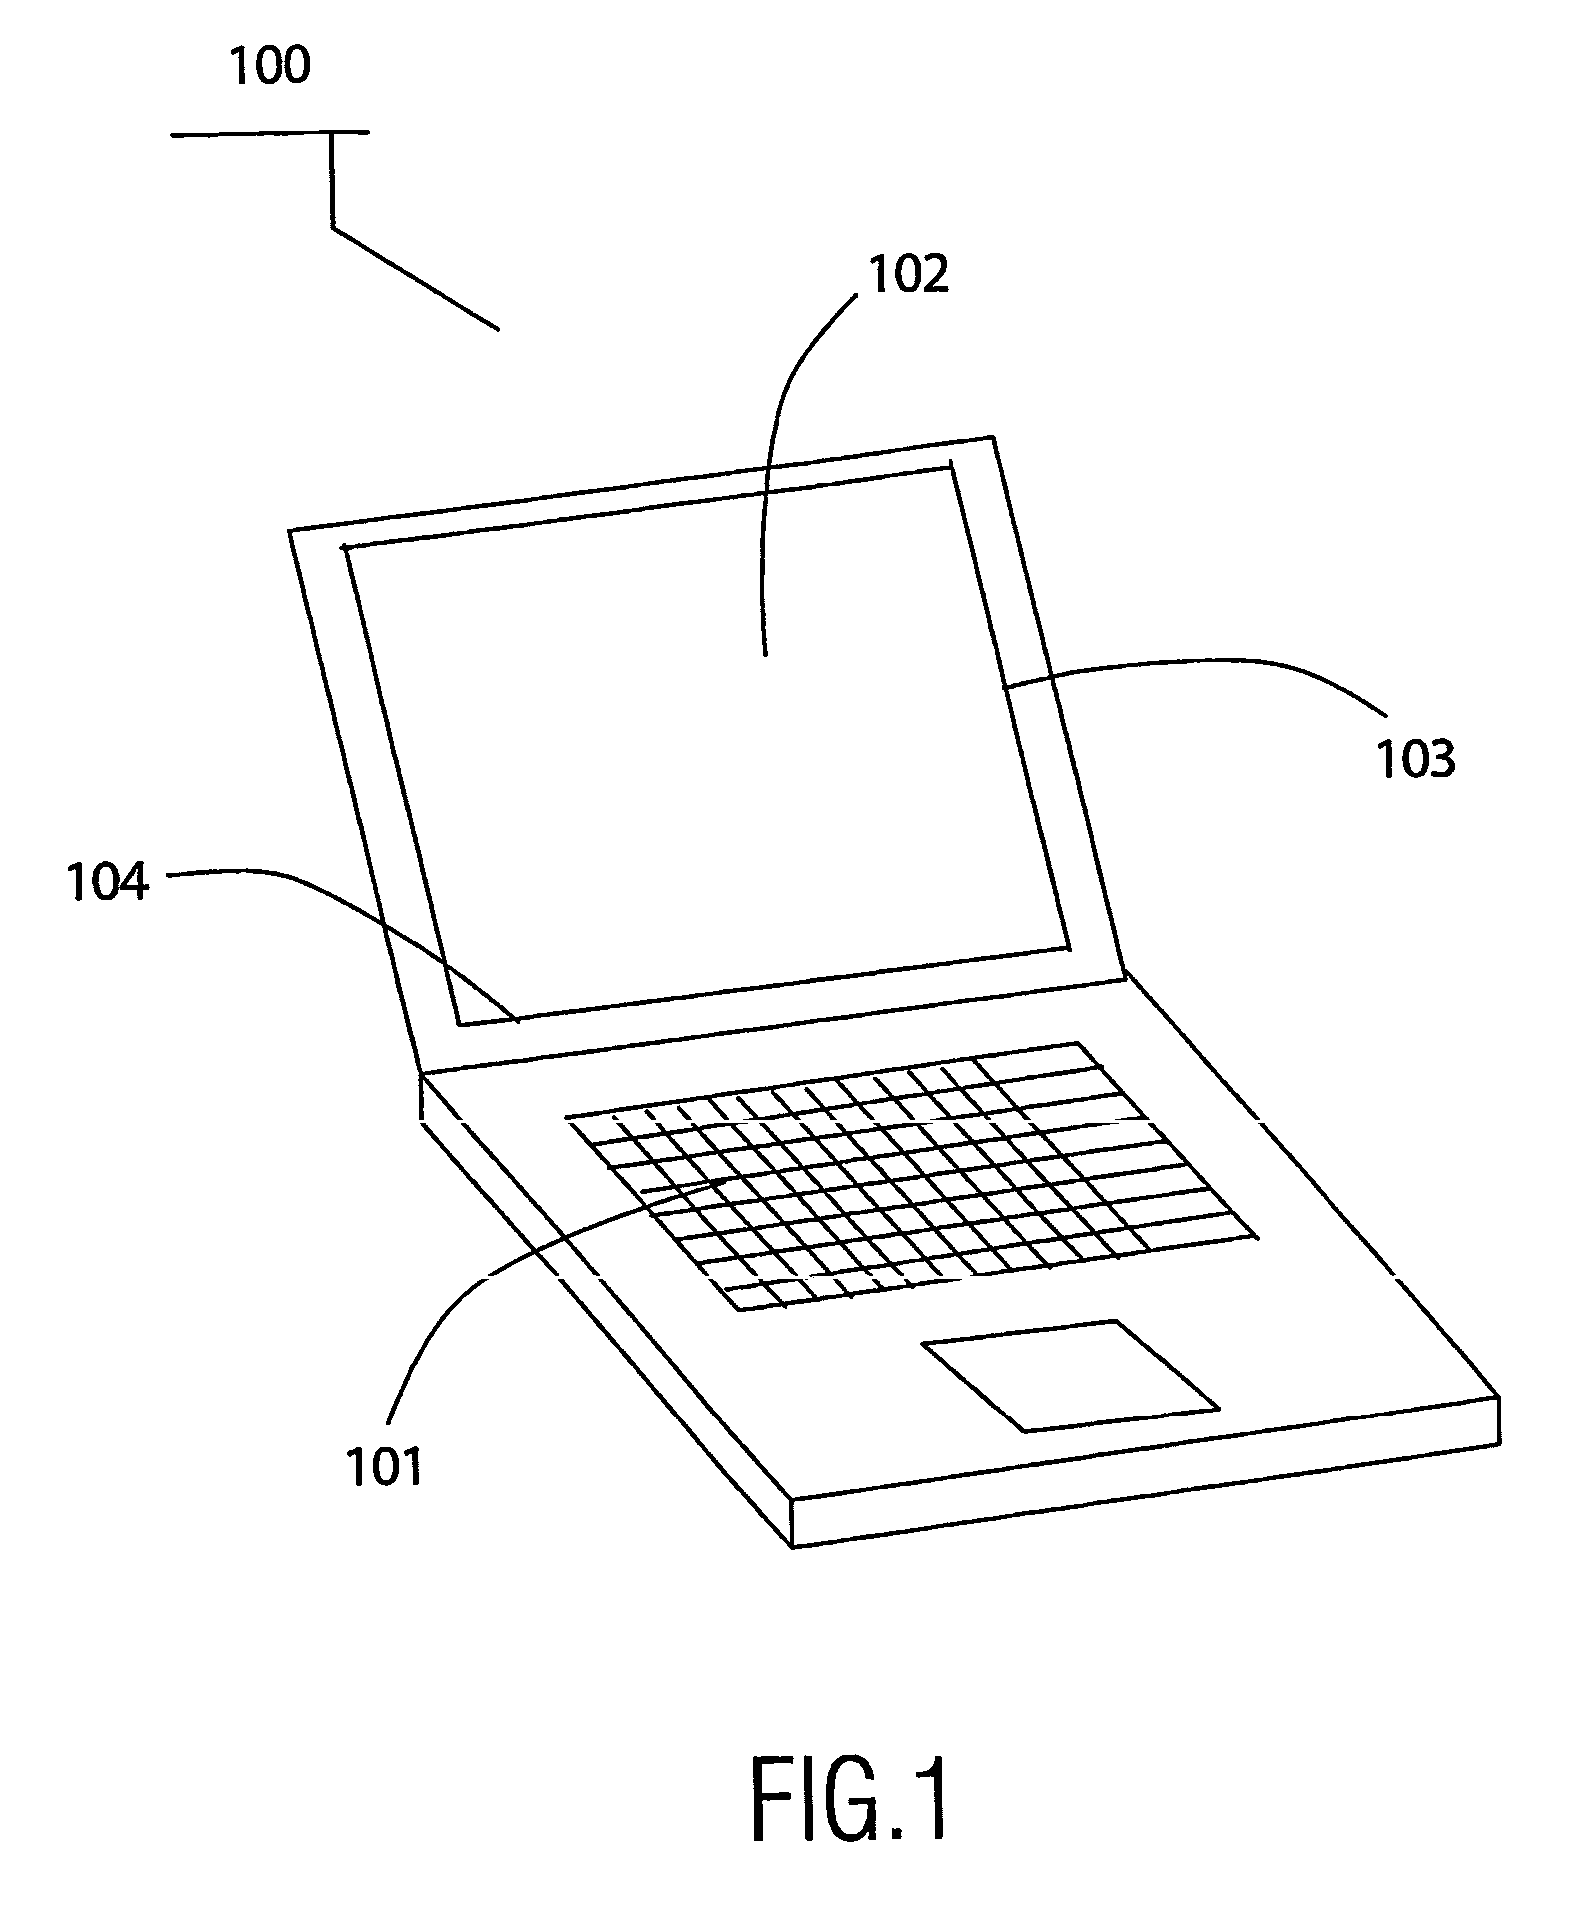 Coordinate detection system for a display monitor